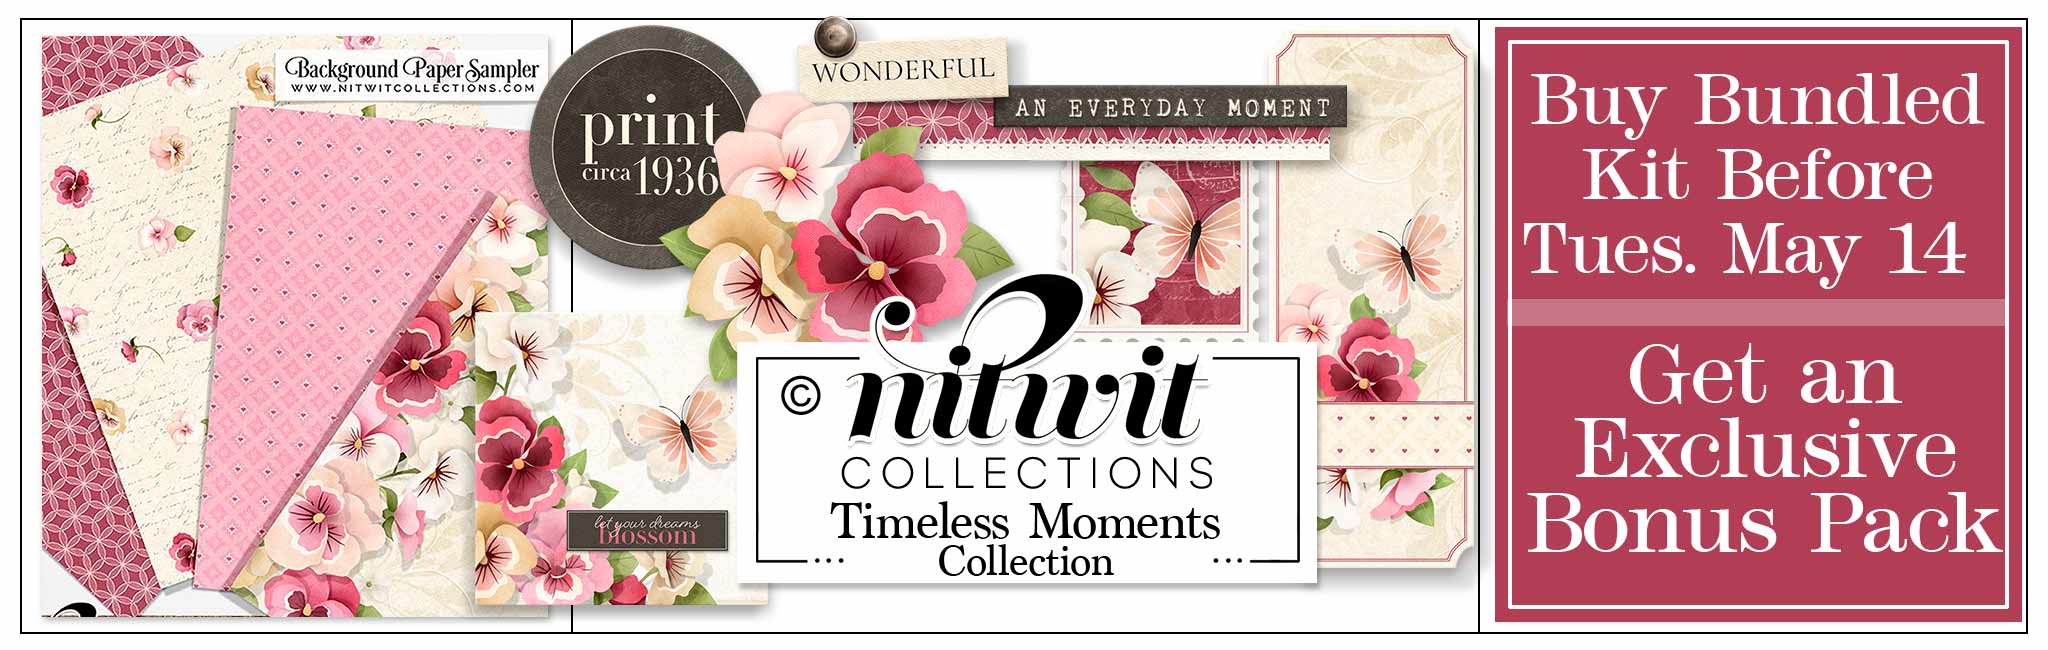 Timeless Moments Collection